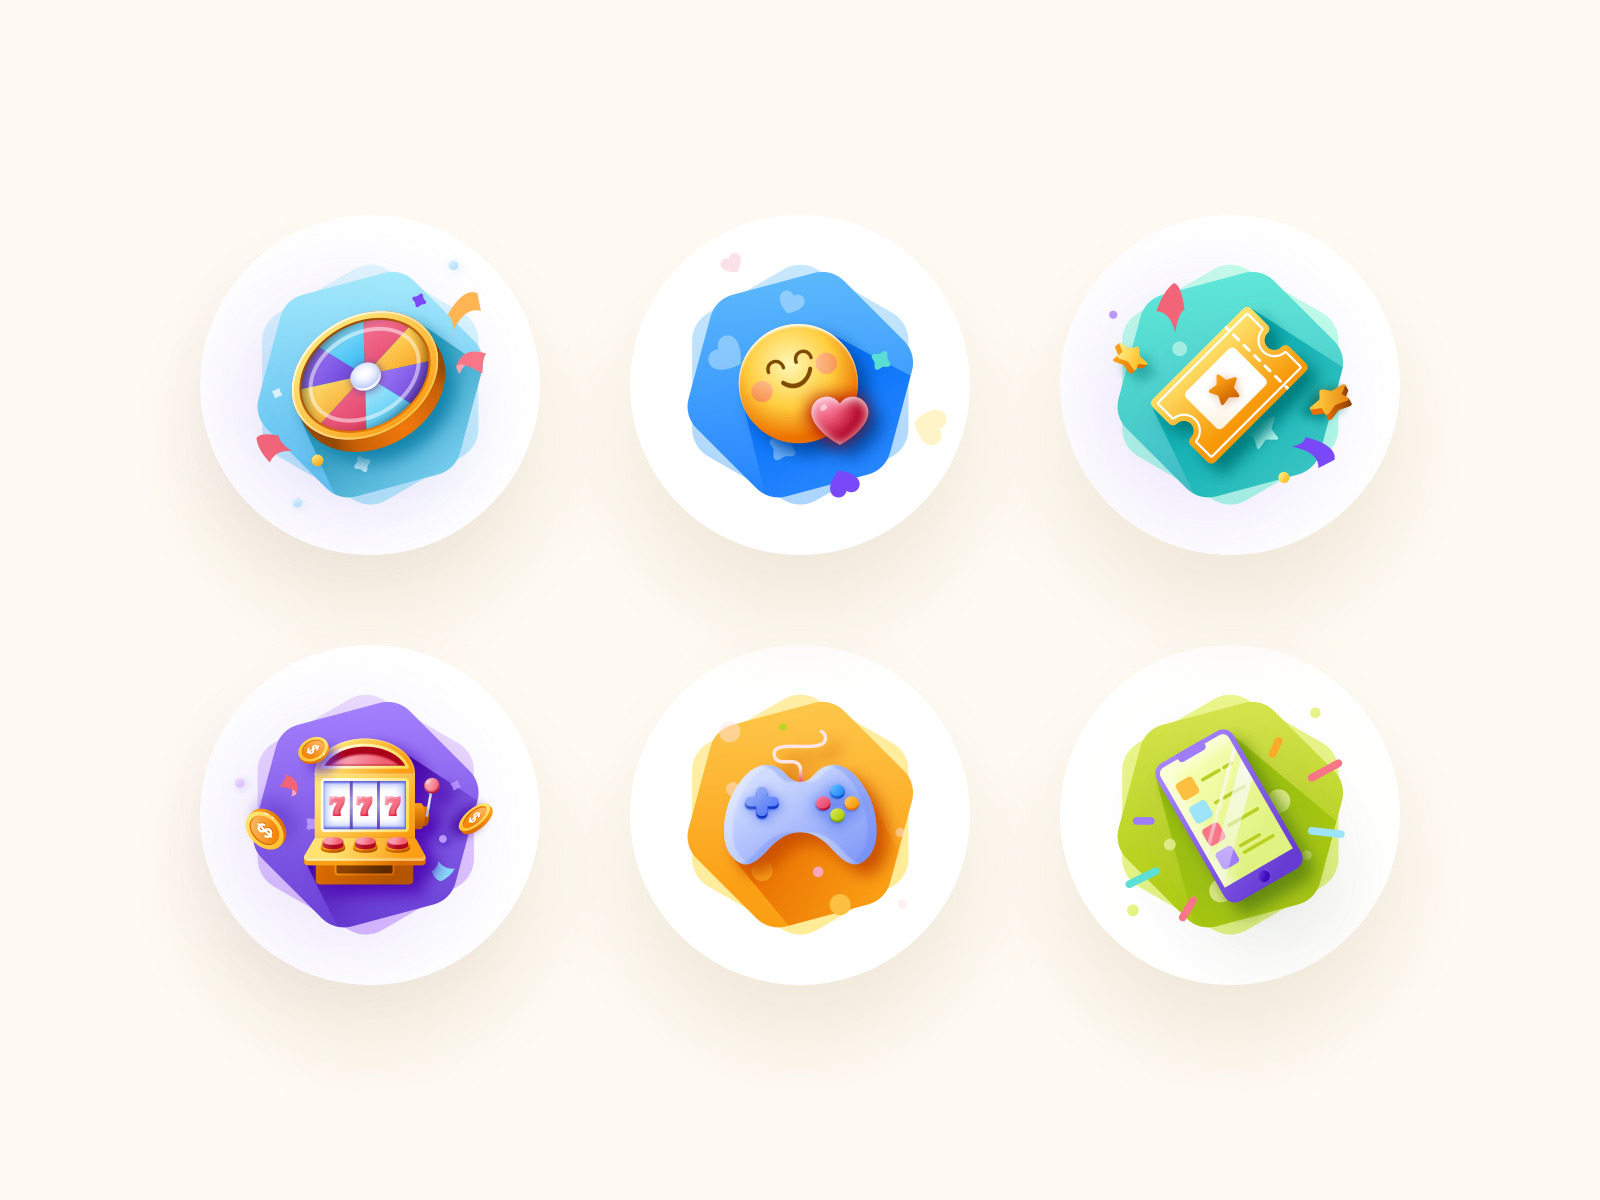 5 Best Practices for Mobile Apps with Gamification Elements